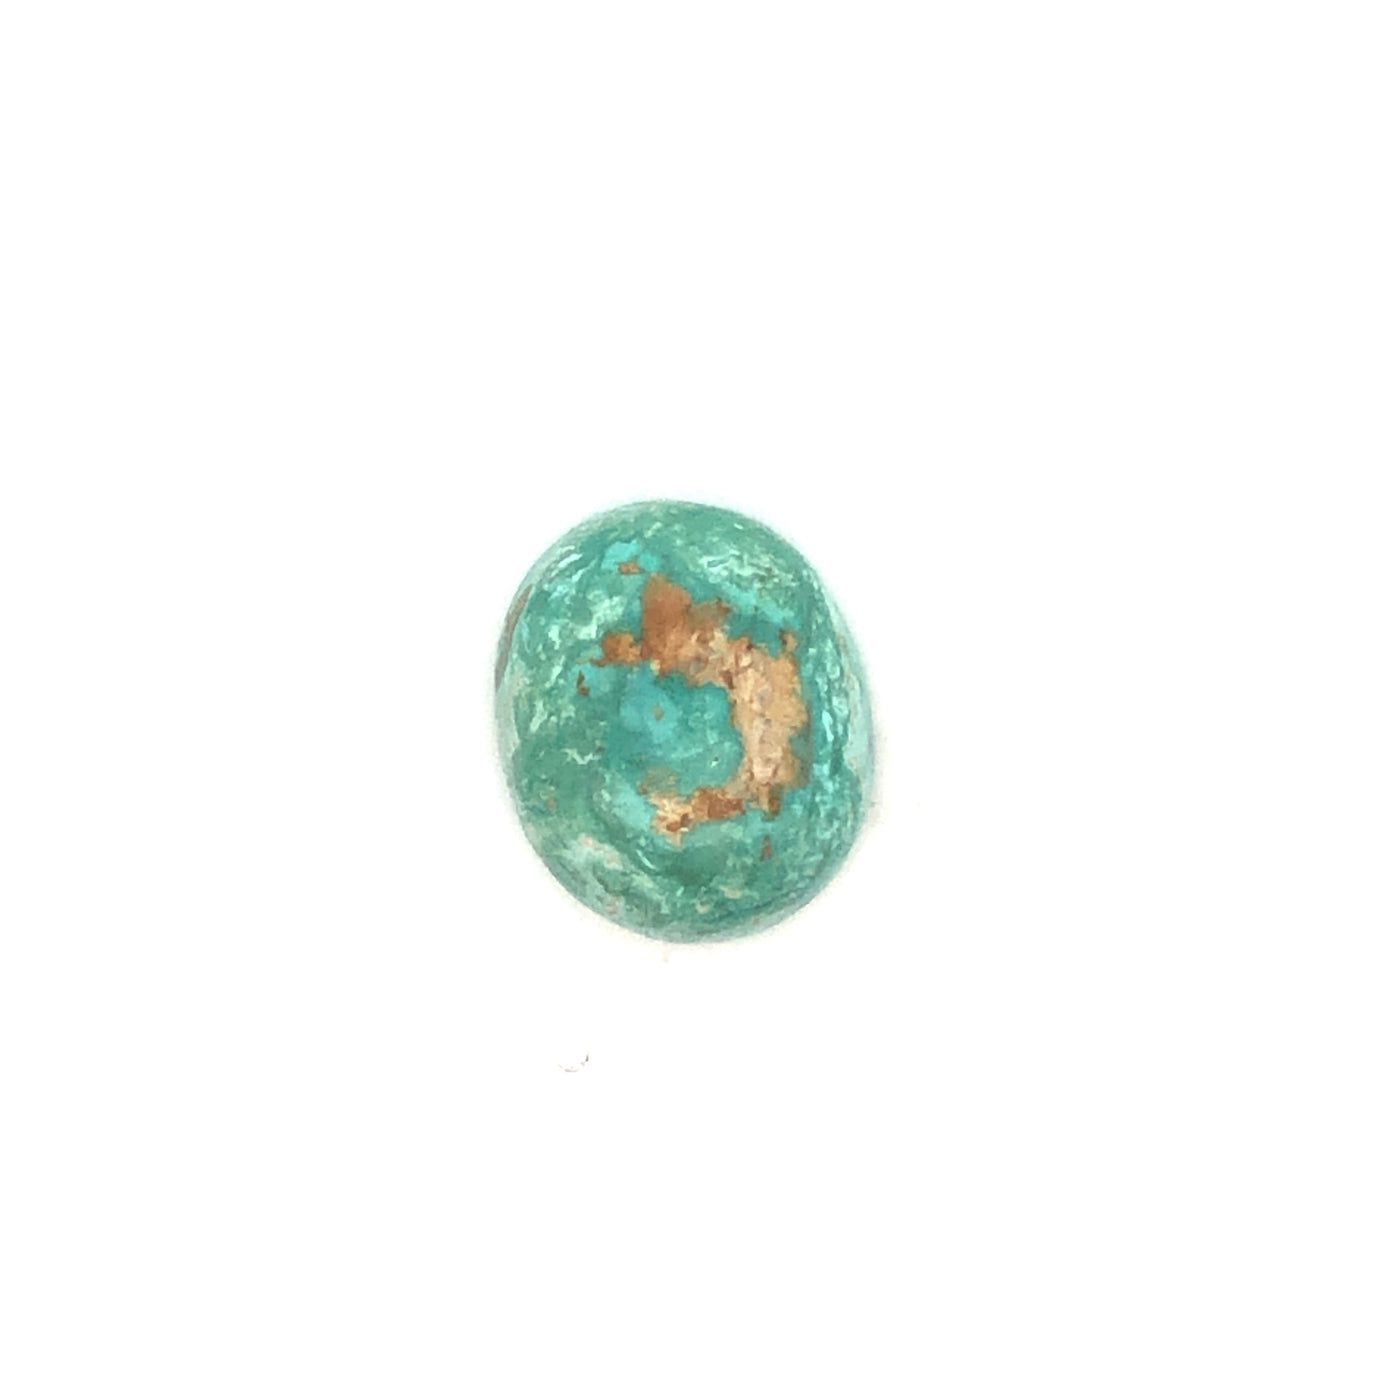 Loose Narooma Turquoise Oval Shaped 17.96Ct Blue With Some White/Brown